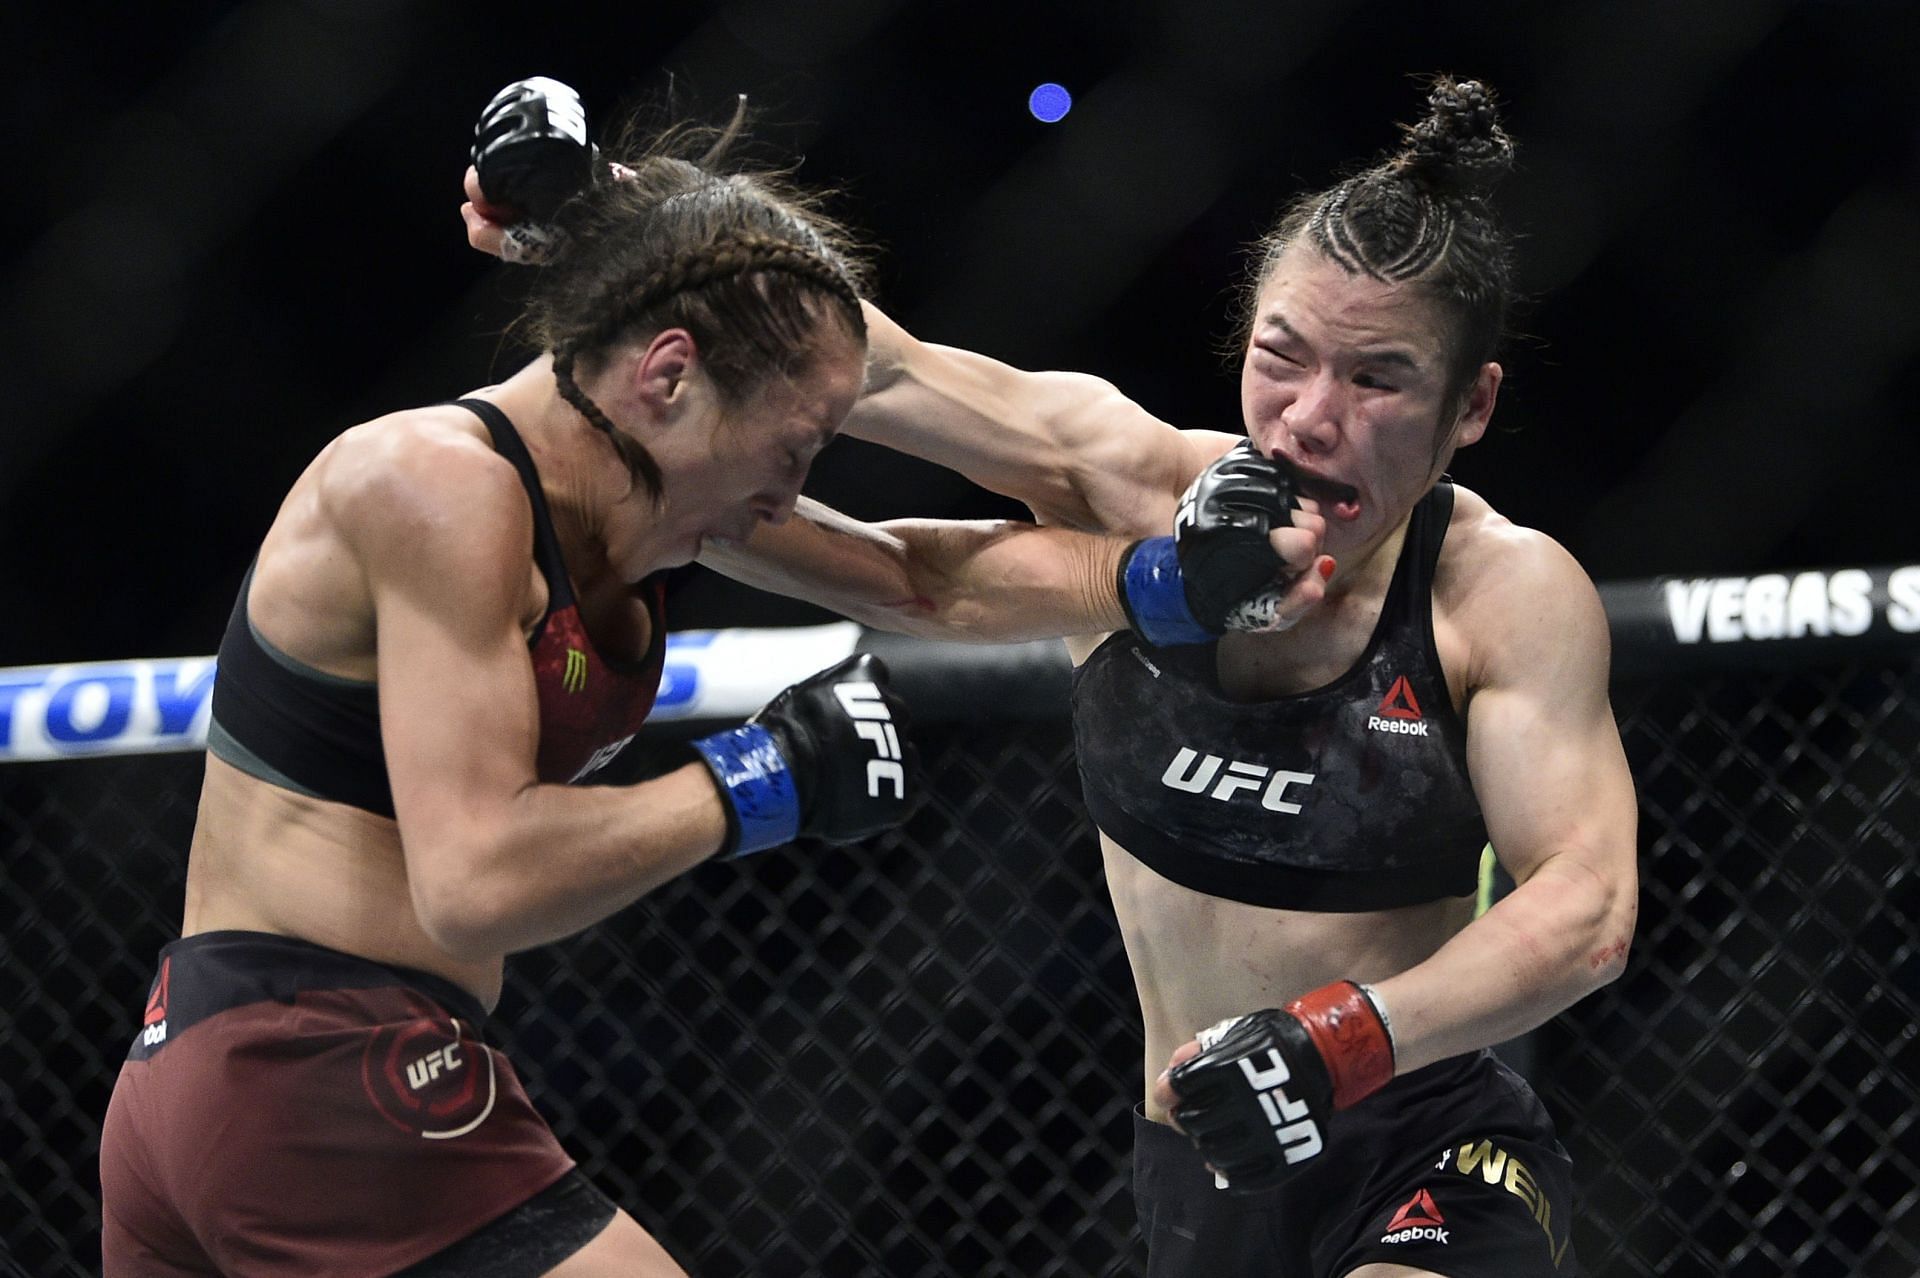 June sees Joanna Jedrzejczyk face off with Weili Zhang in a rematch of their epic encounter in 2020